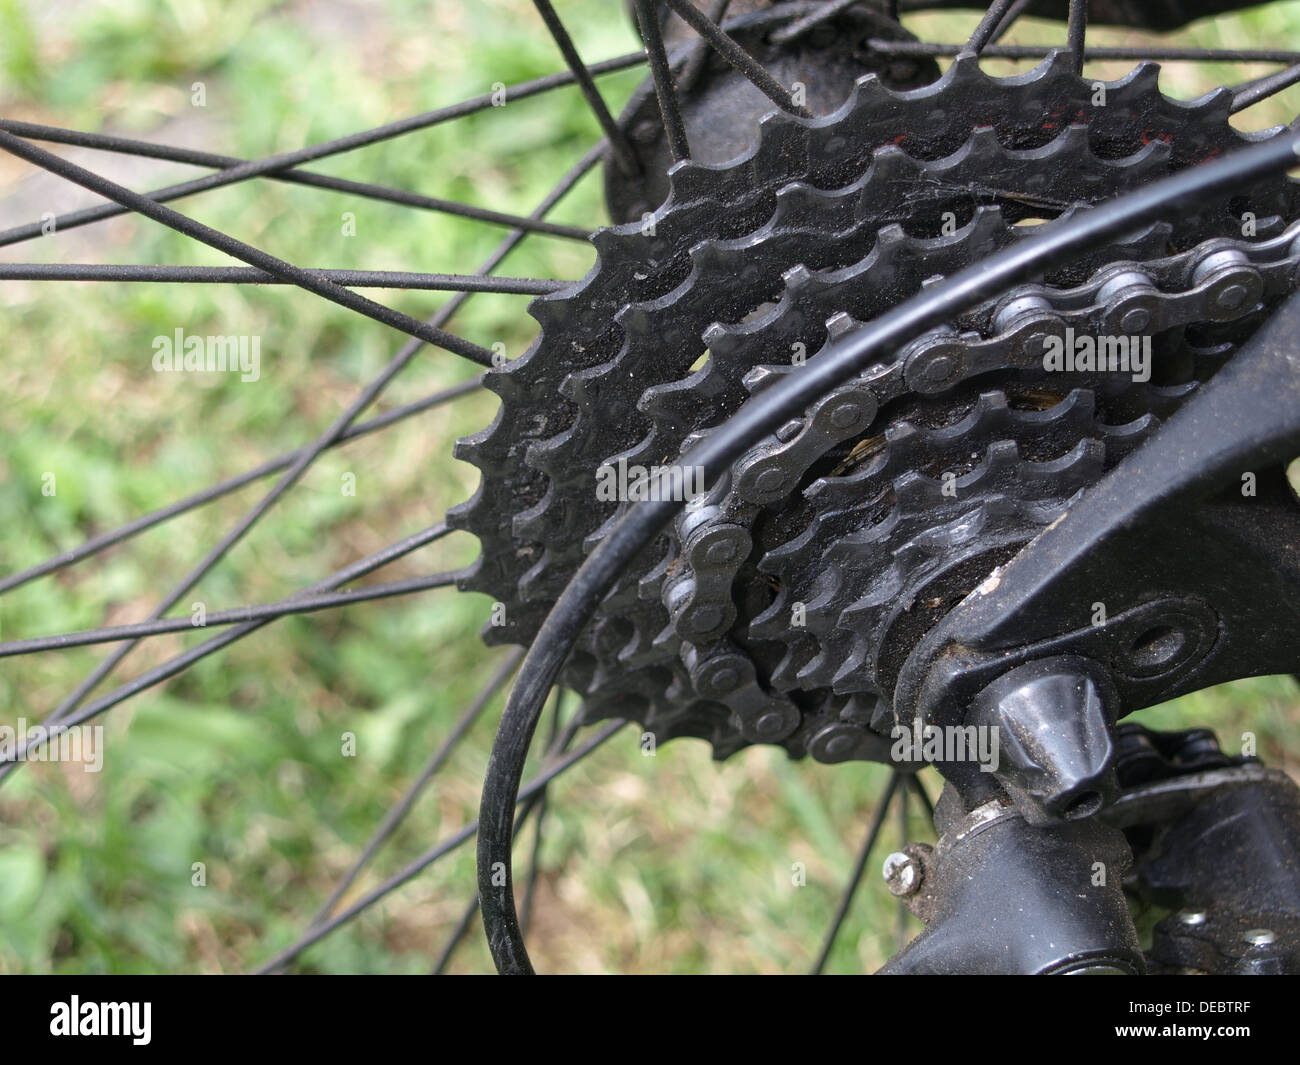 images Hub photography Alamy and gear stock hi-res -